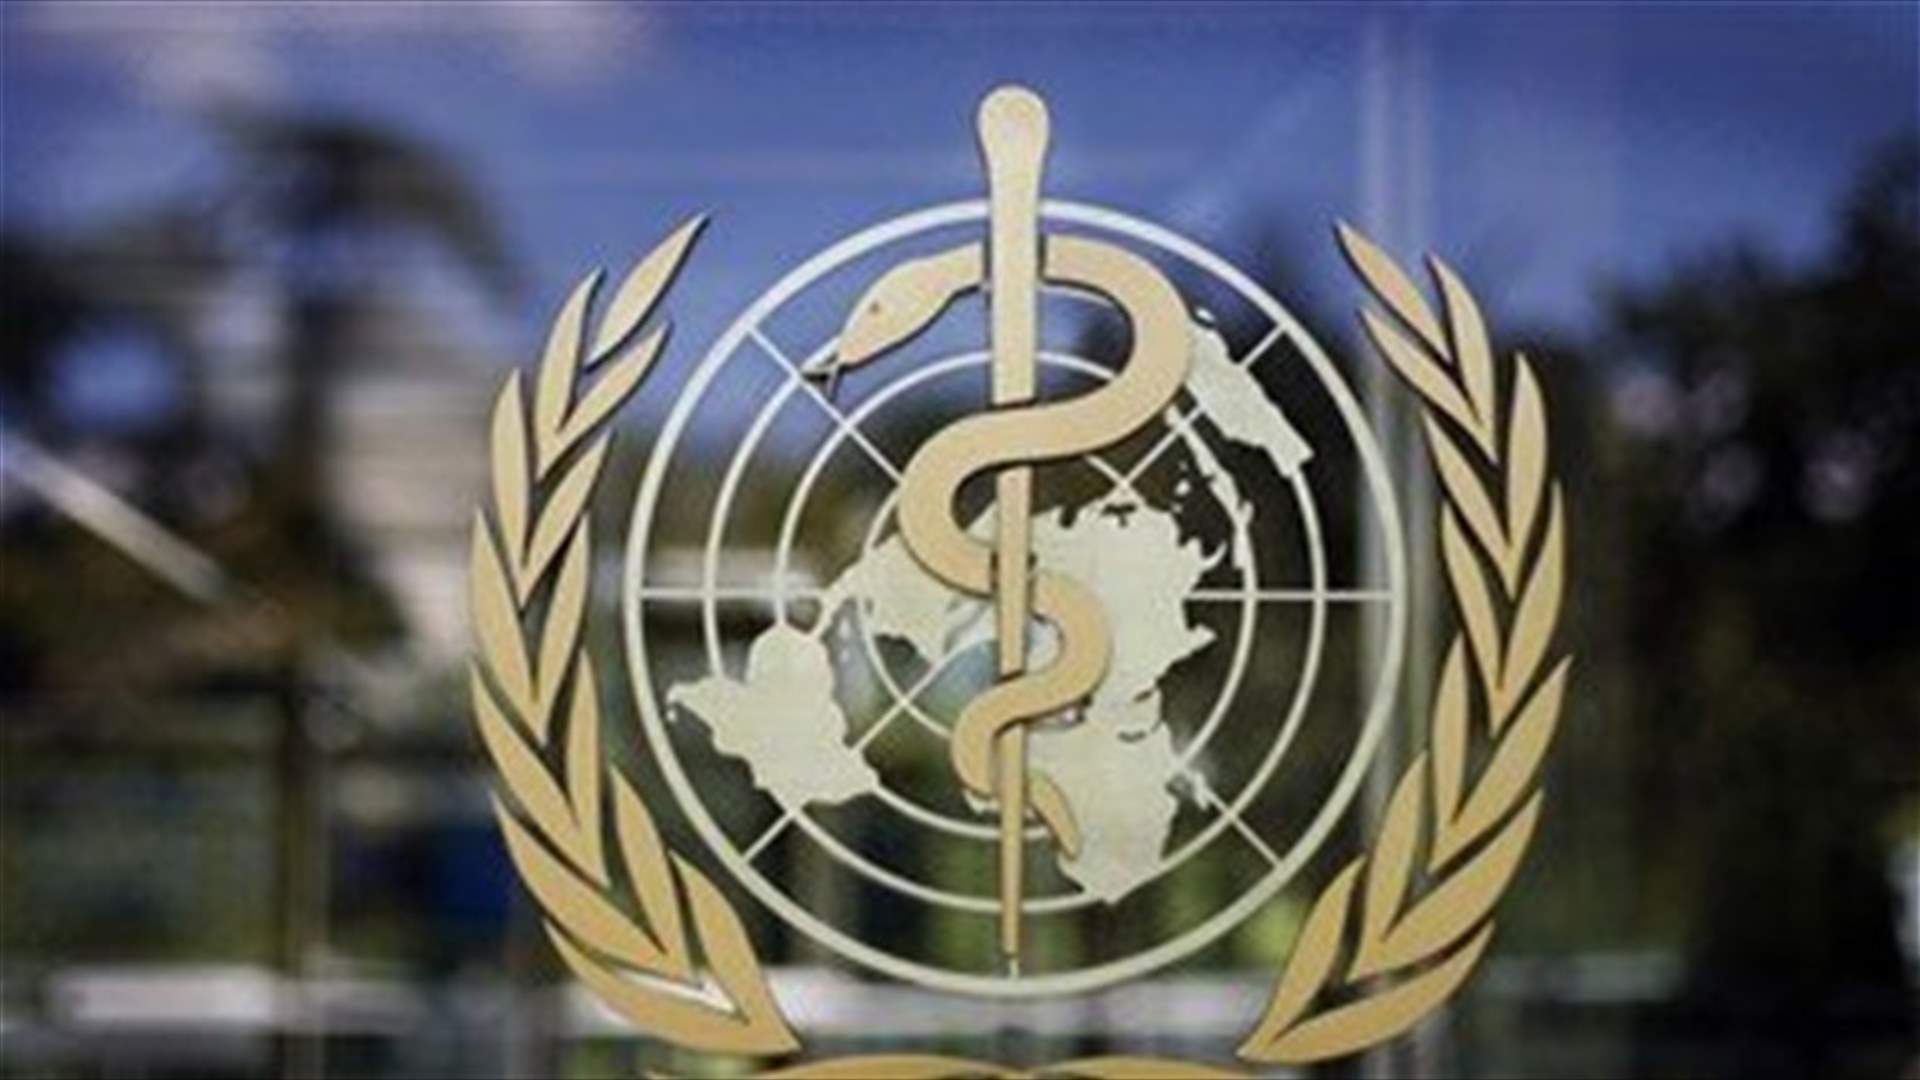 Mideast states must share more information on coronavirus cases - WHO